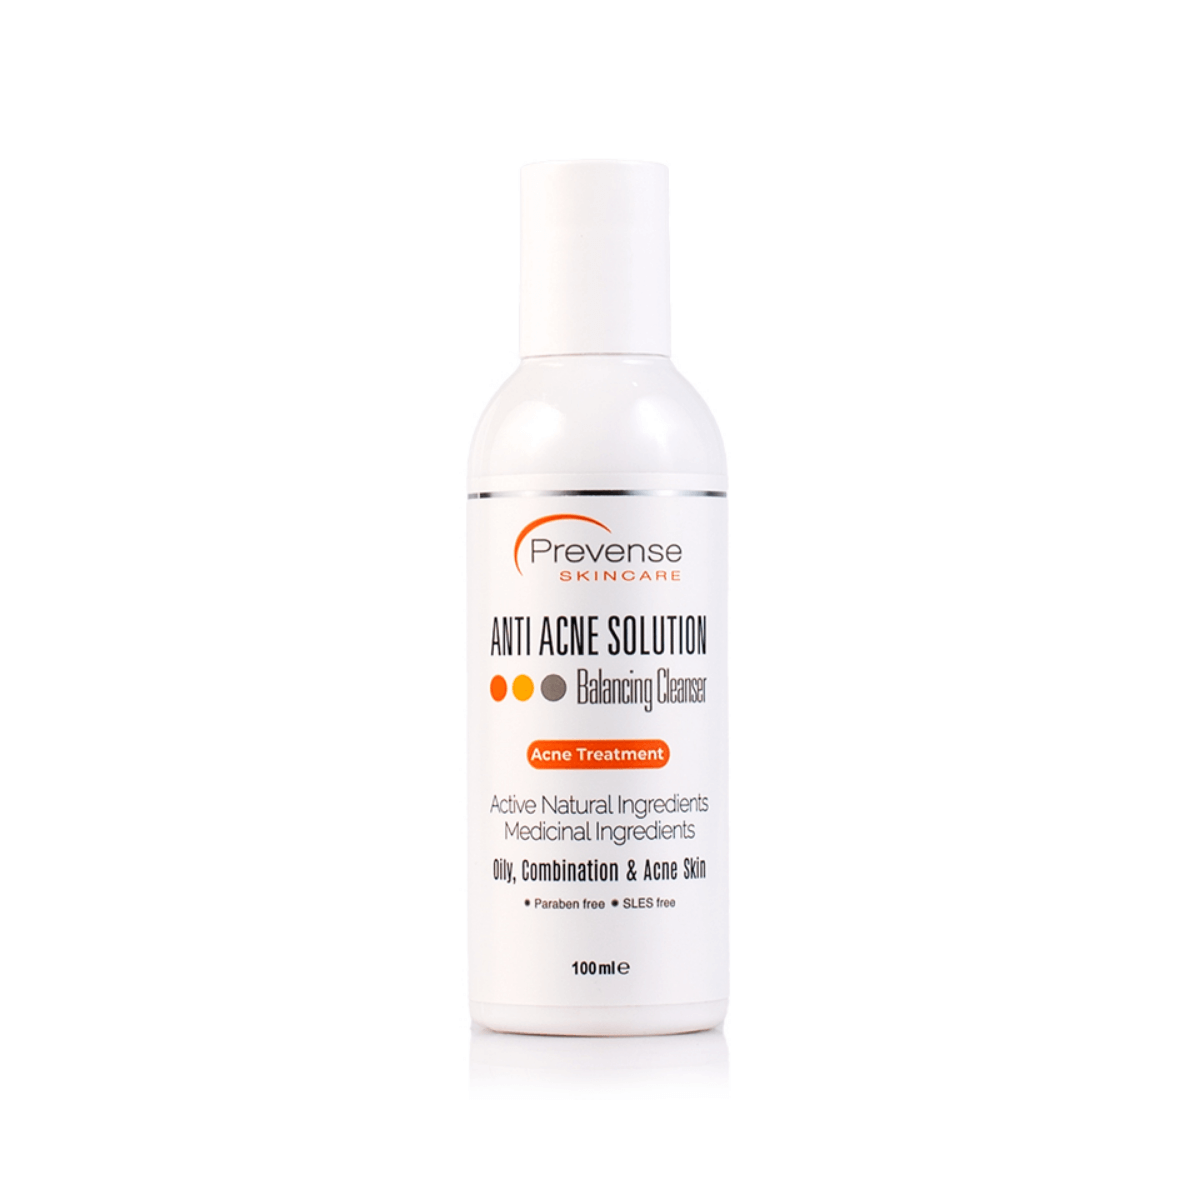 ACNE SOLUTION BALANCING CLEANSER